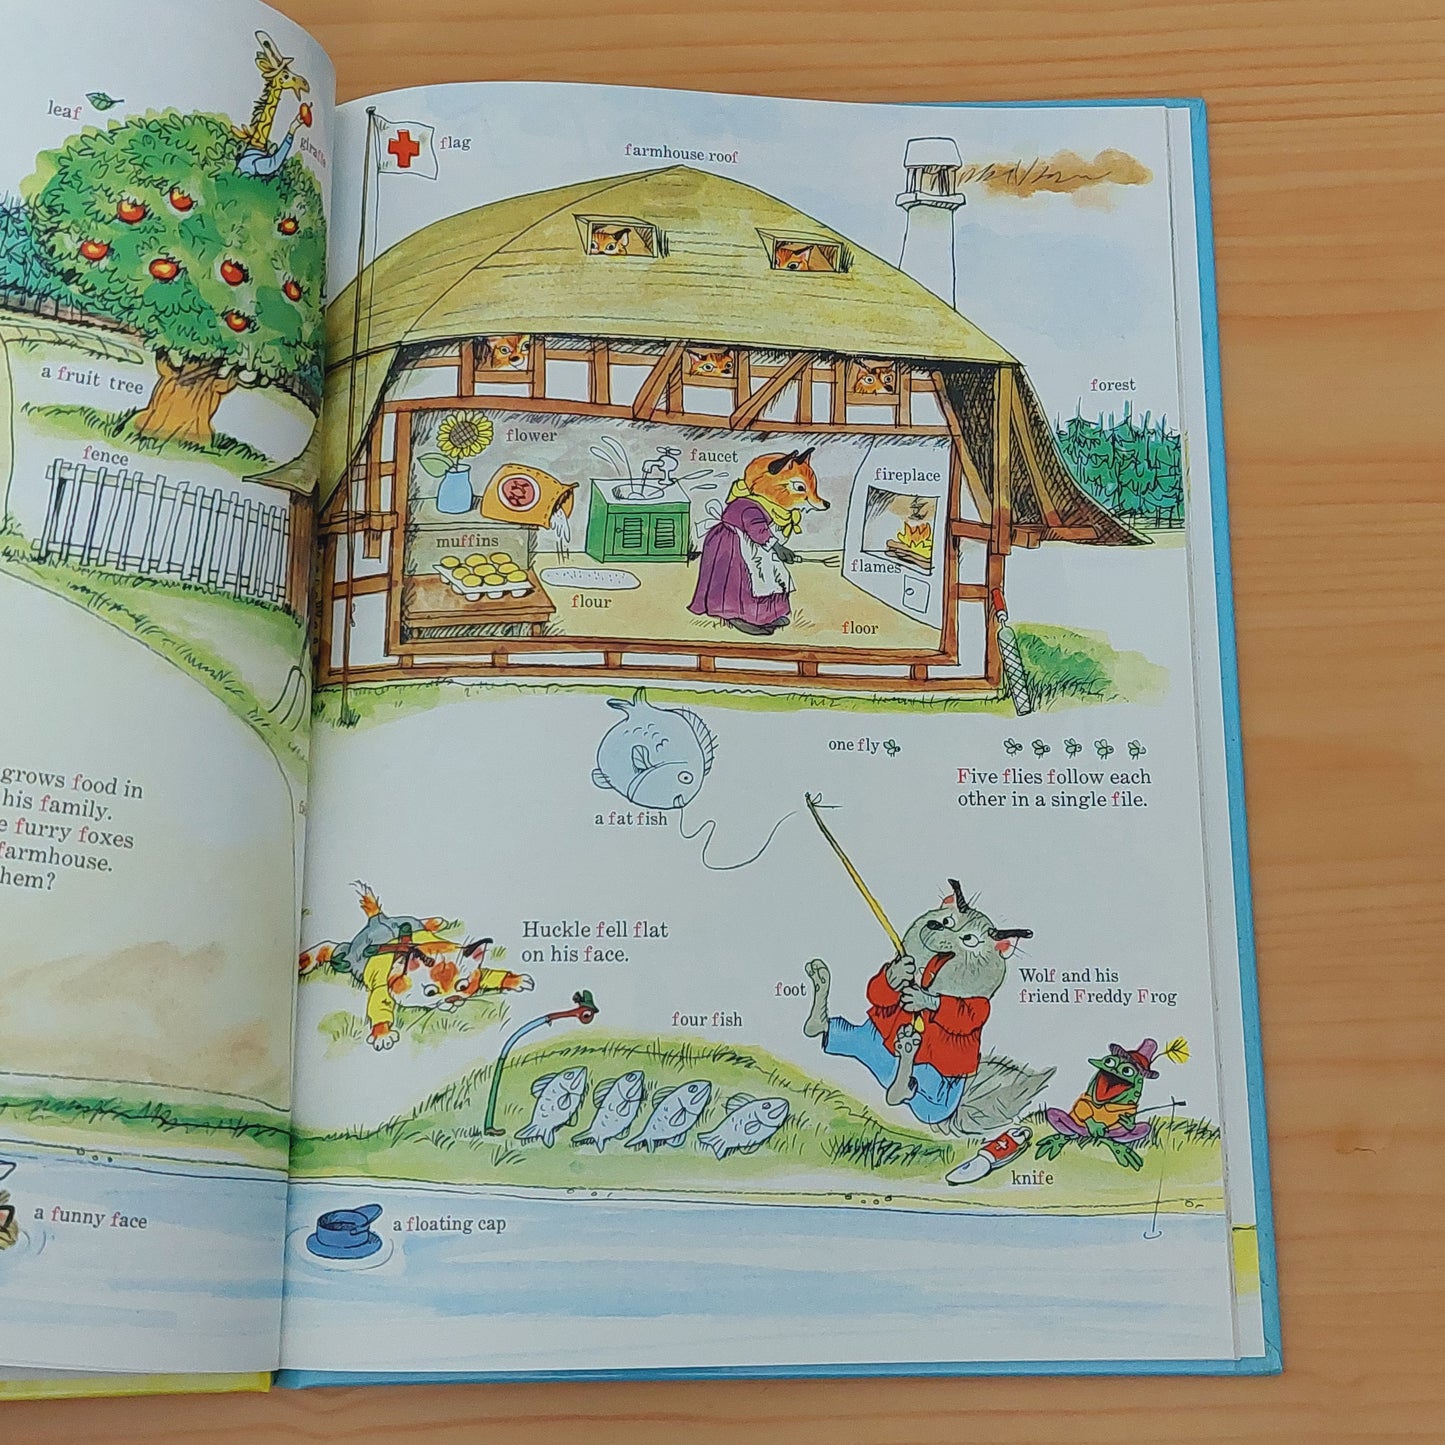 ABC by Richard Scarry's